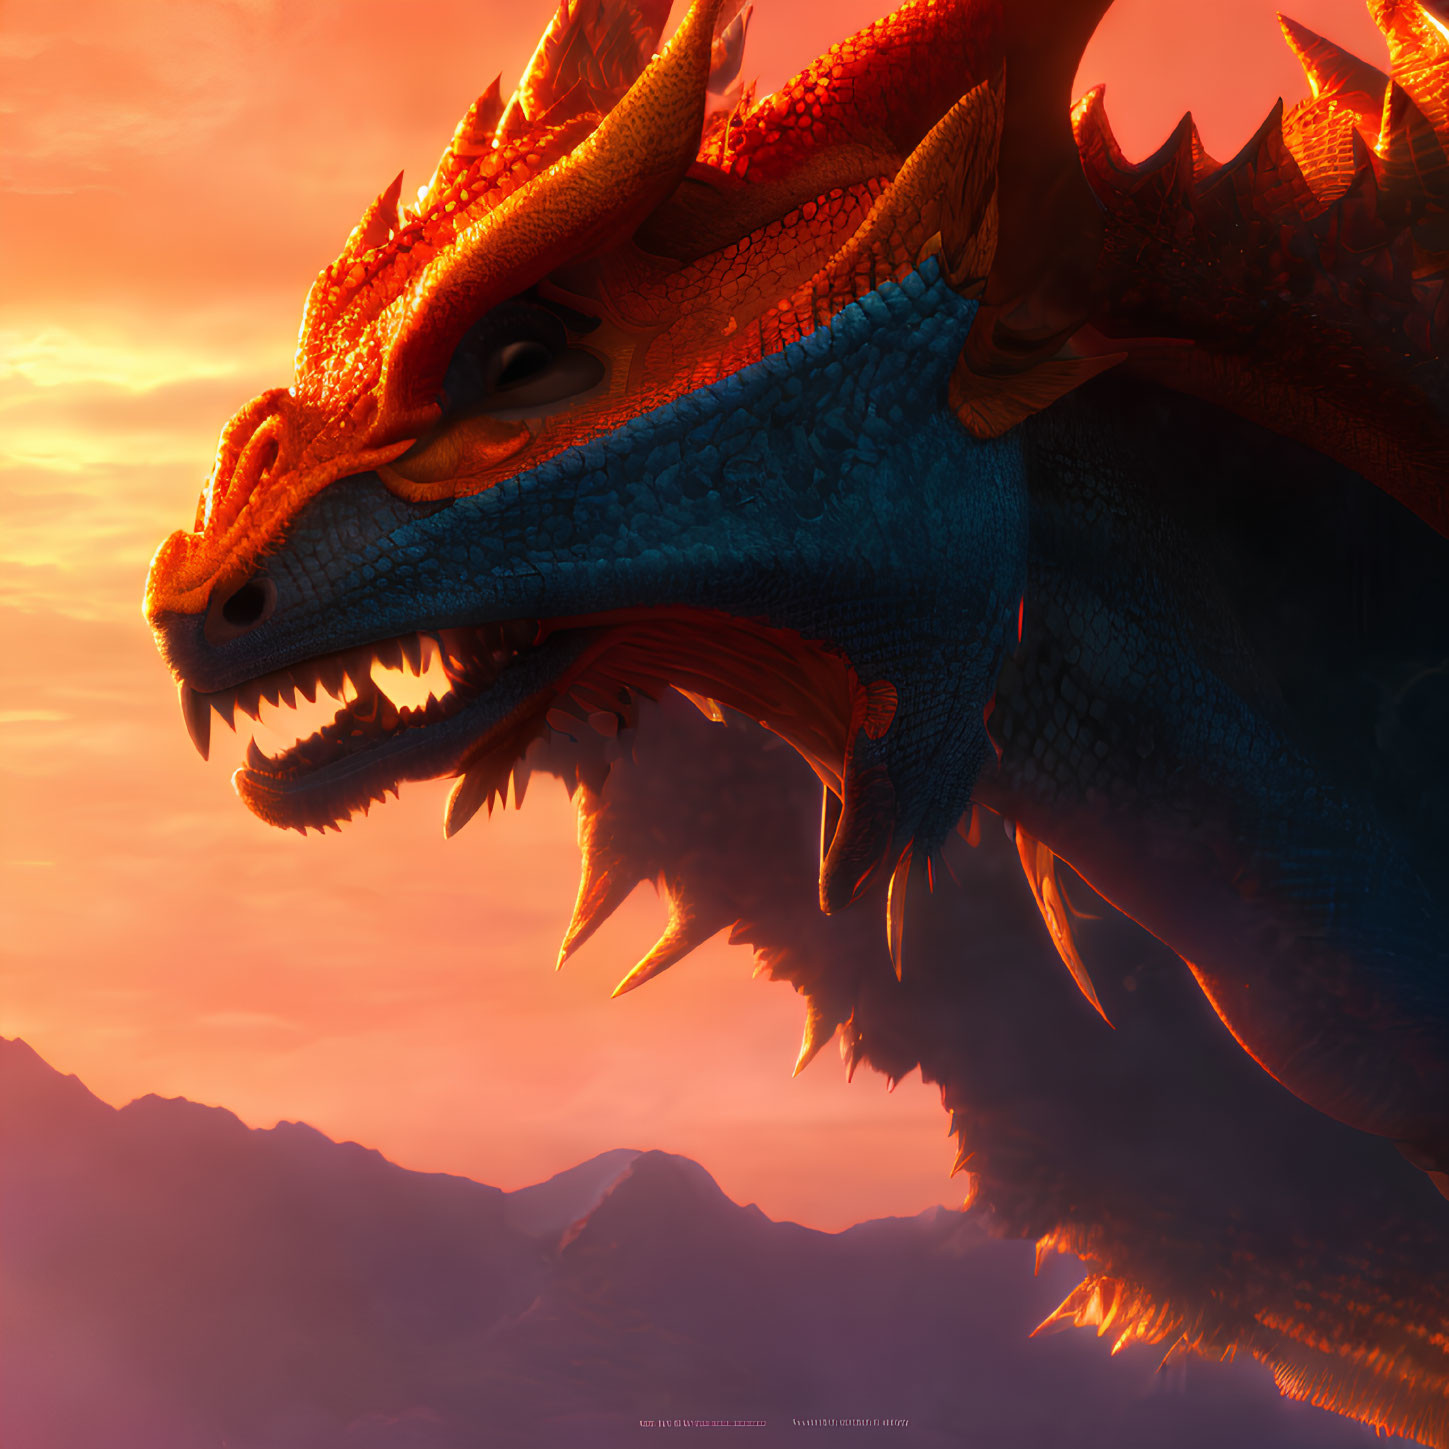 Blue dragon with orange spikes and horns against red-orange sky and mountains.